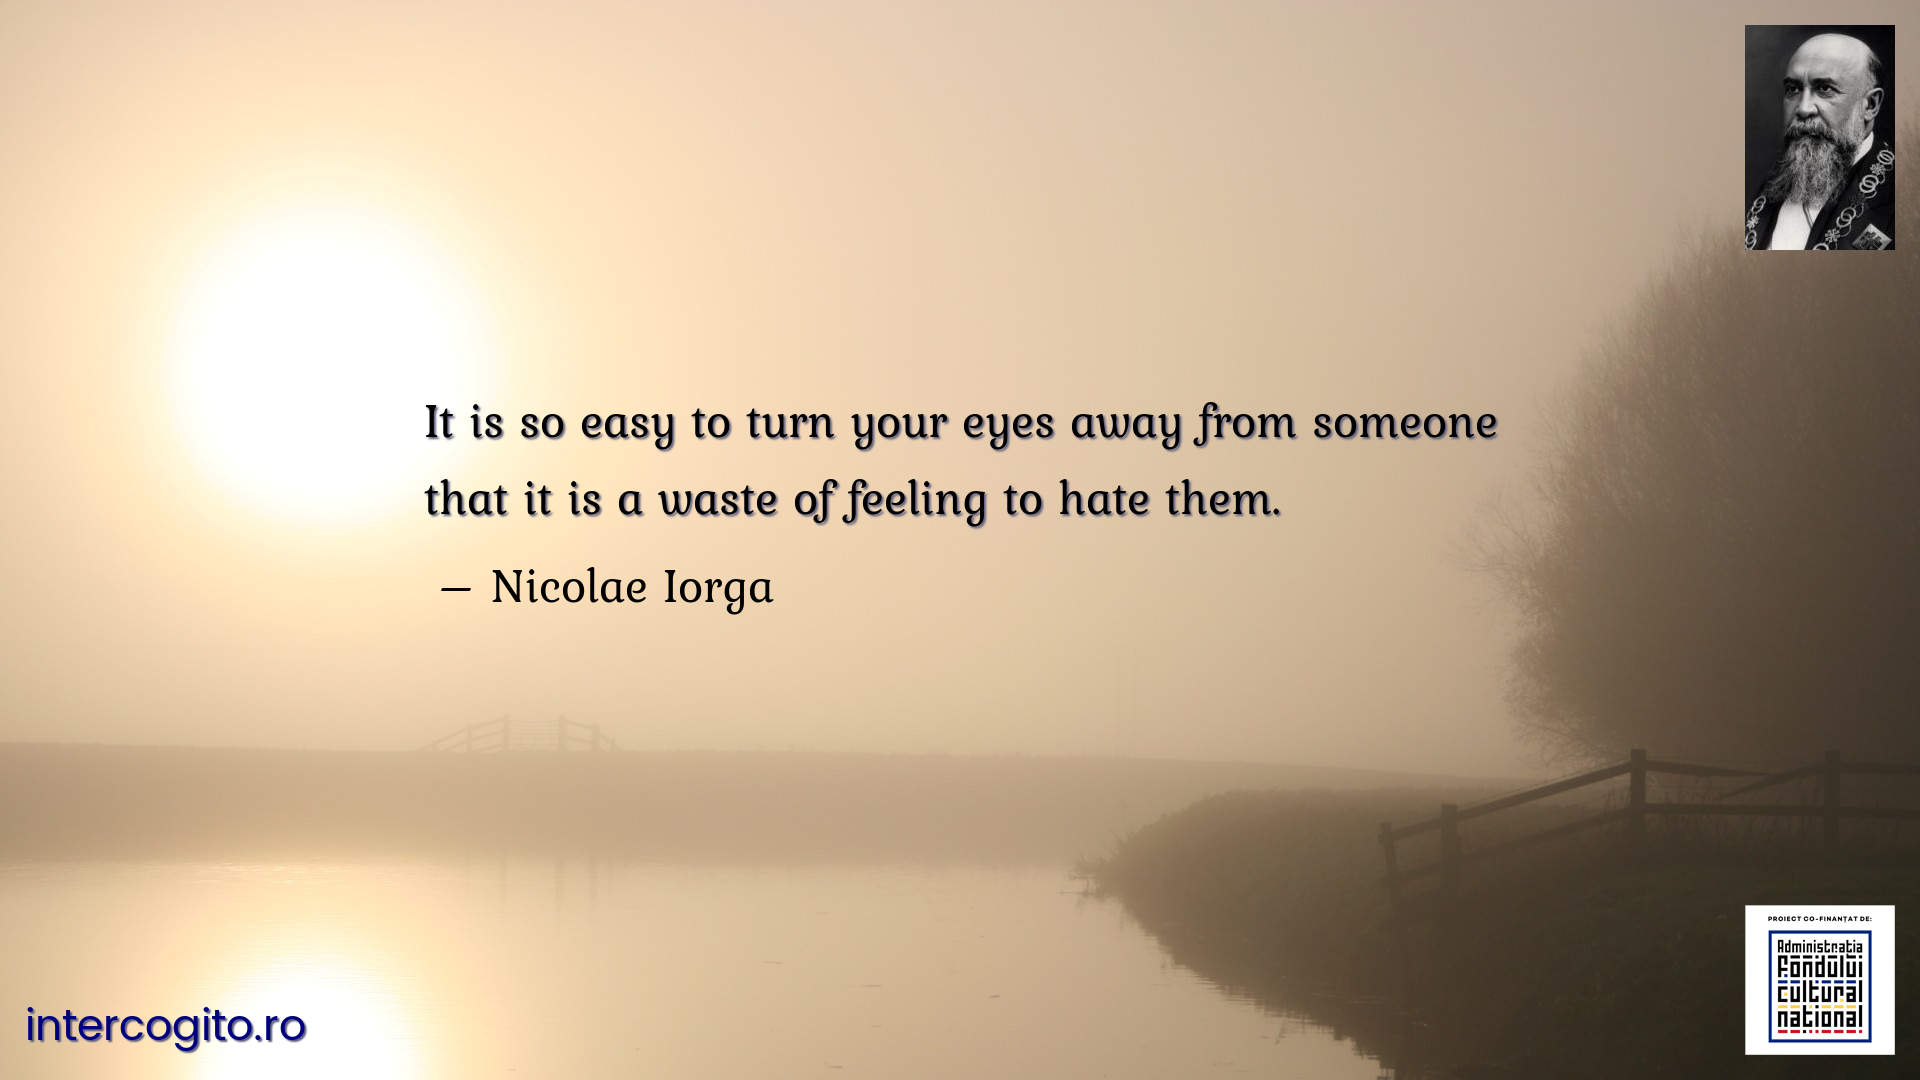 It is so easy to turn your eyes away from someone that it is a waste of feeling to hate them.